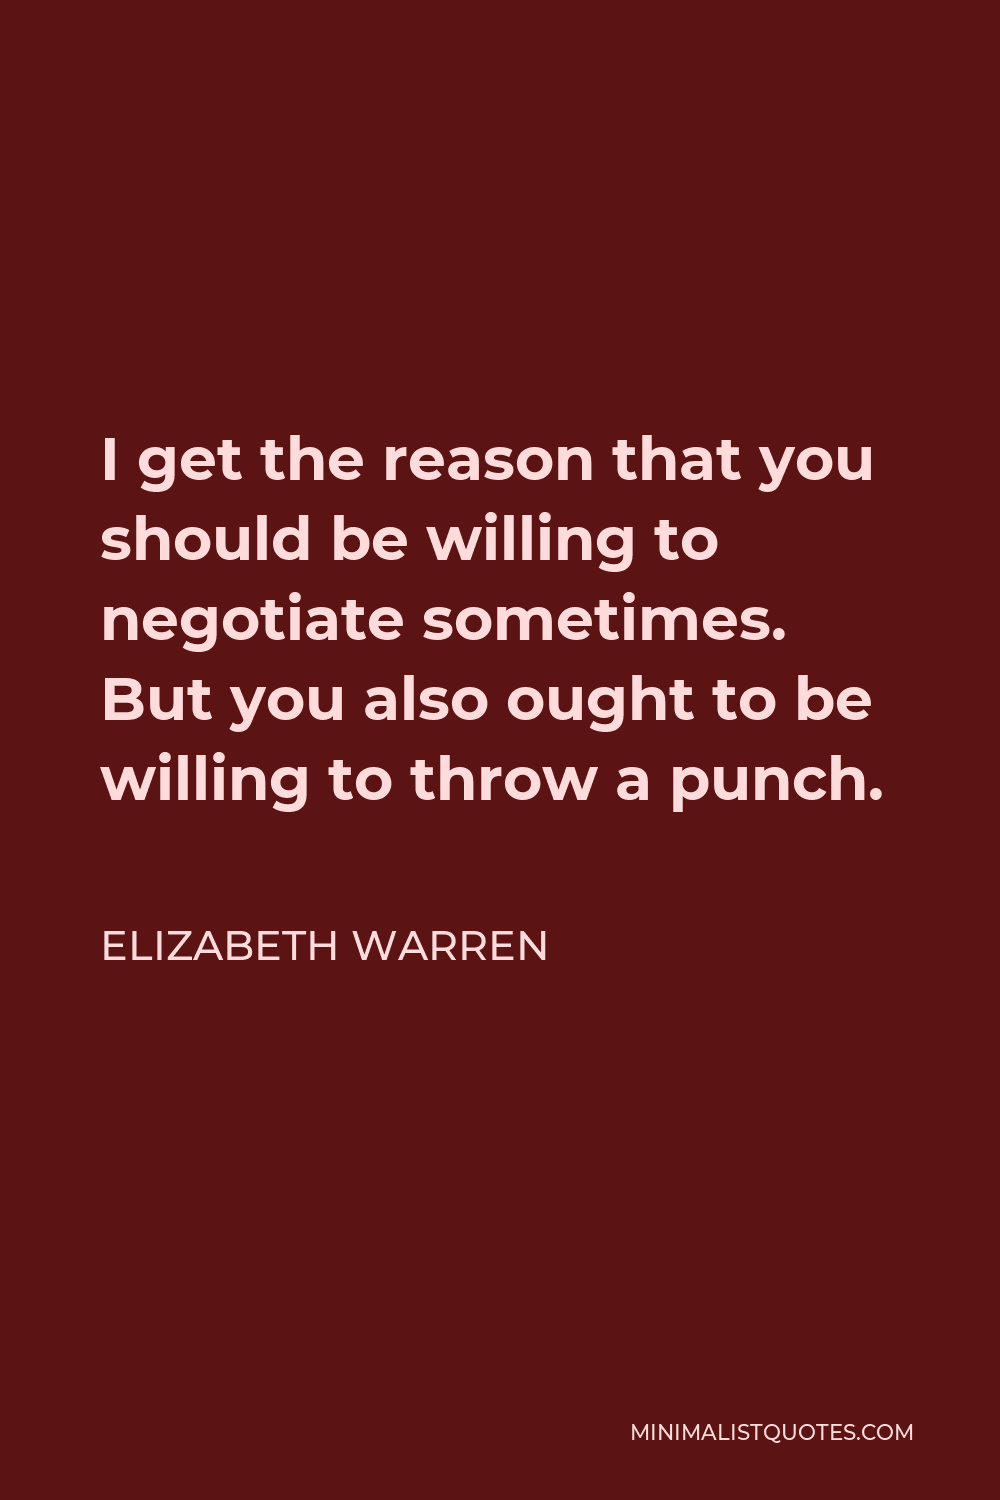 Elizabeth Warren Quote - I get the reason that you should be willing to negotiate sometimes. But you also ought to be willing to throw a punch.